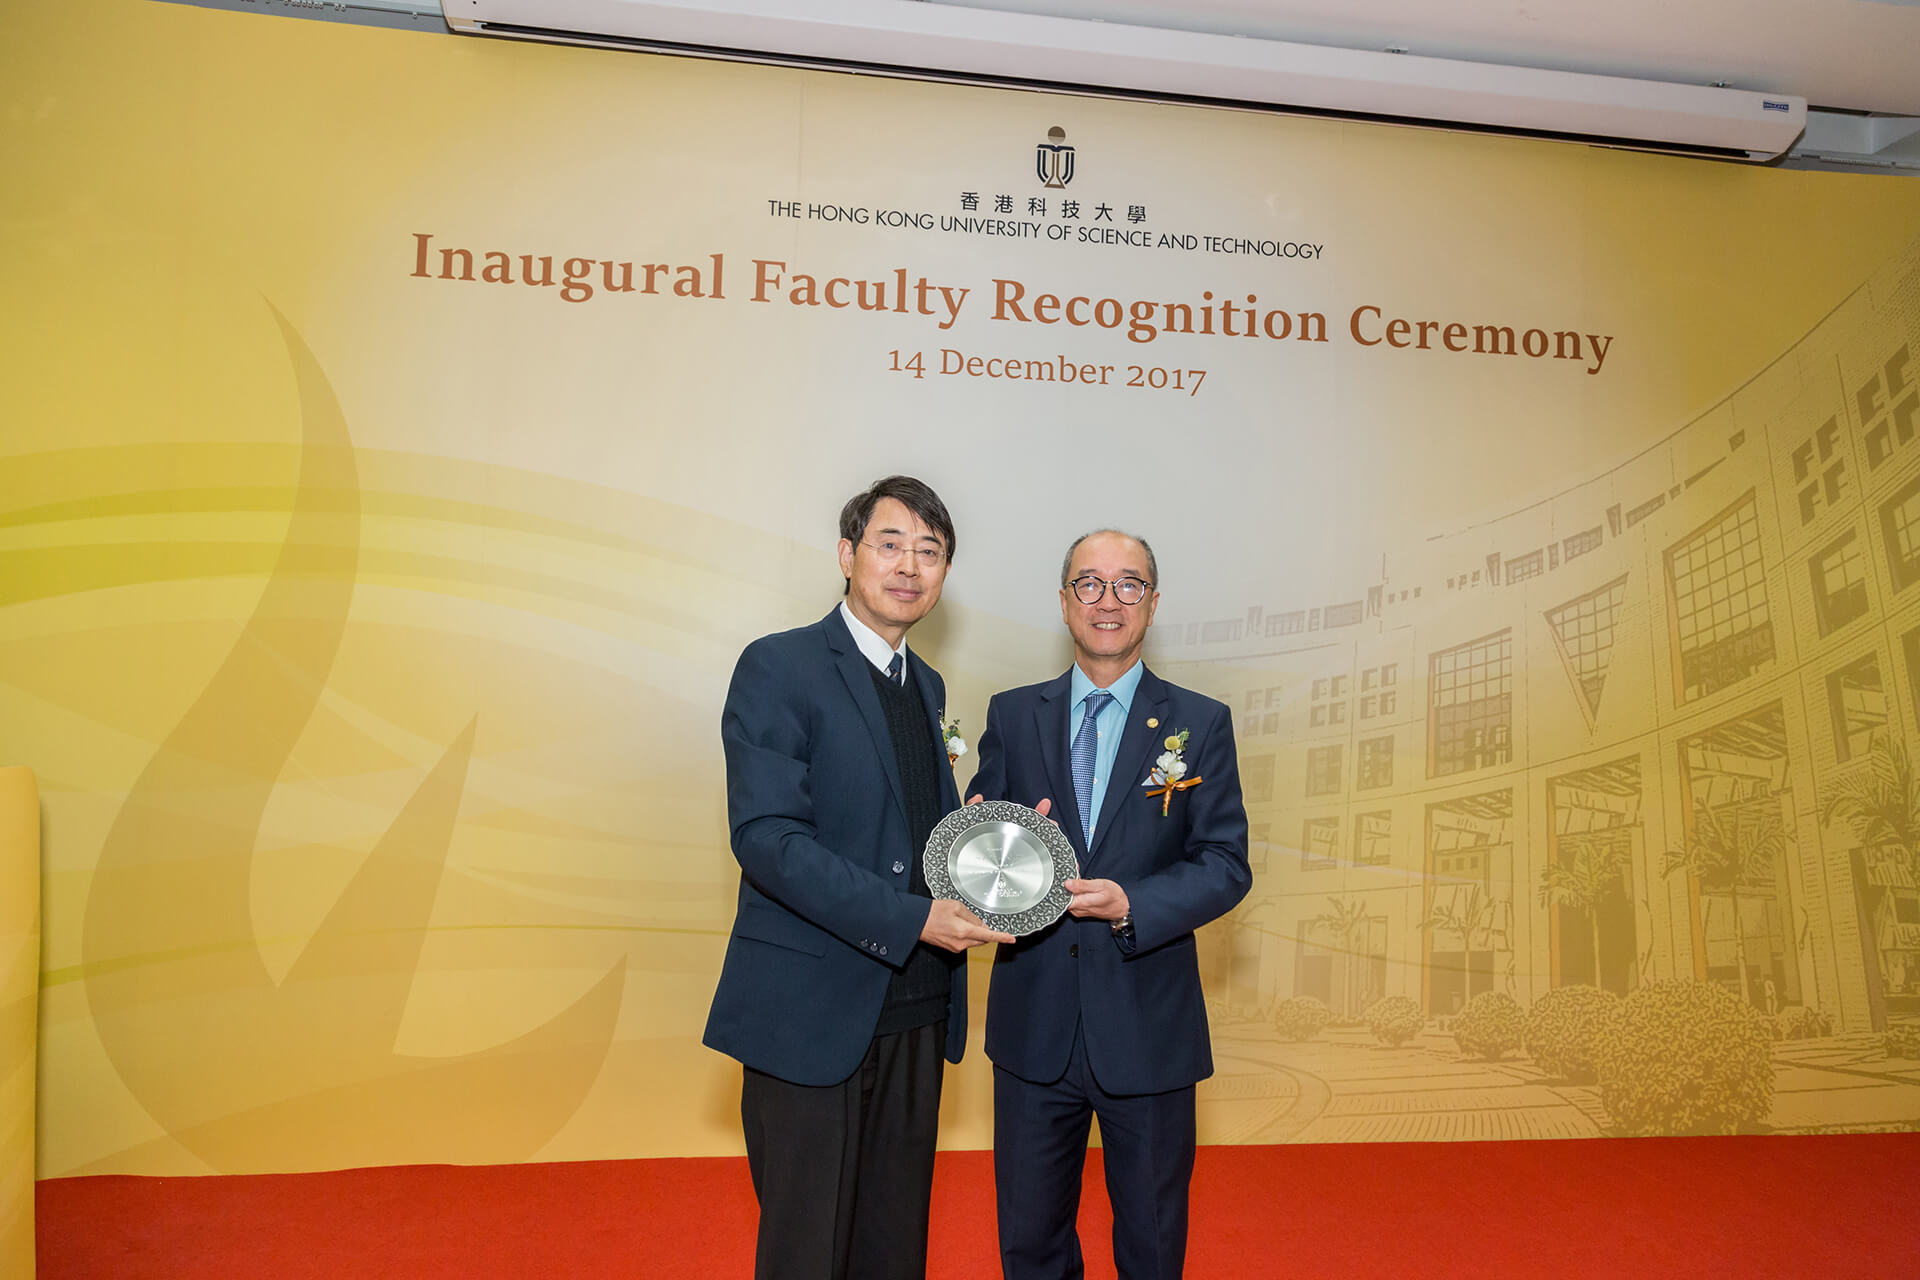 Faculty Recognition Ceremony 2017